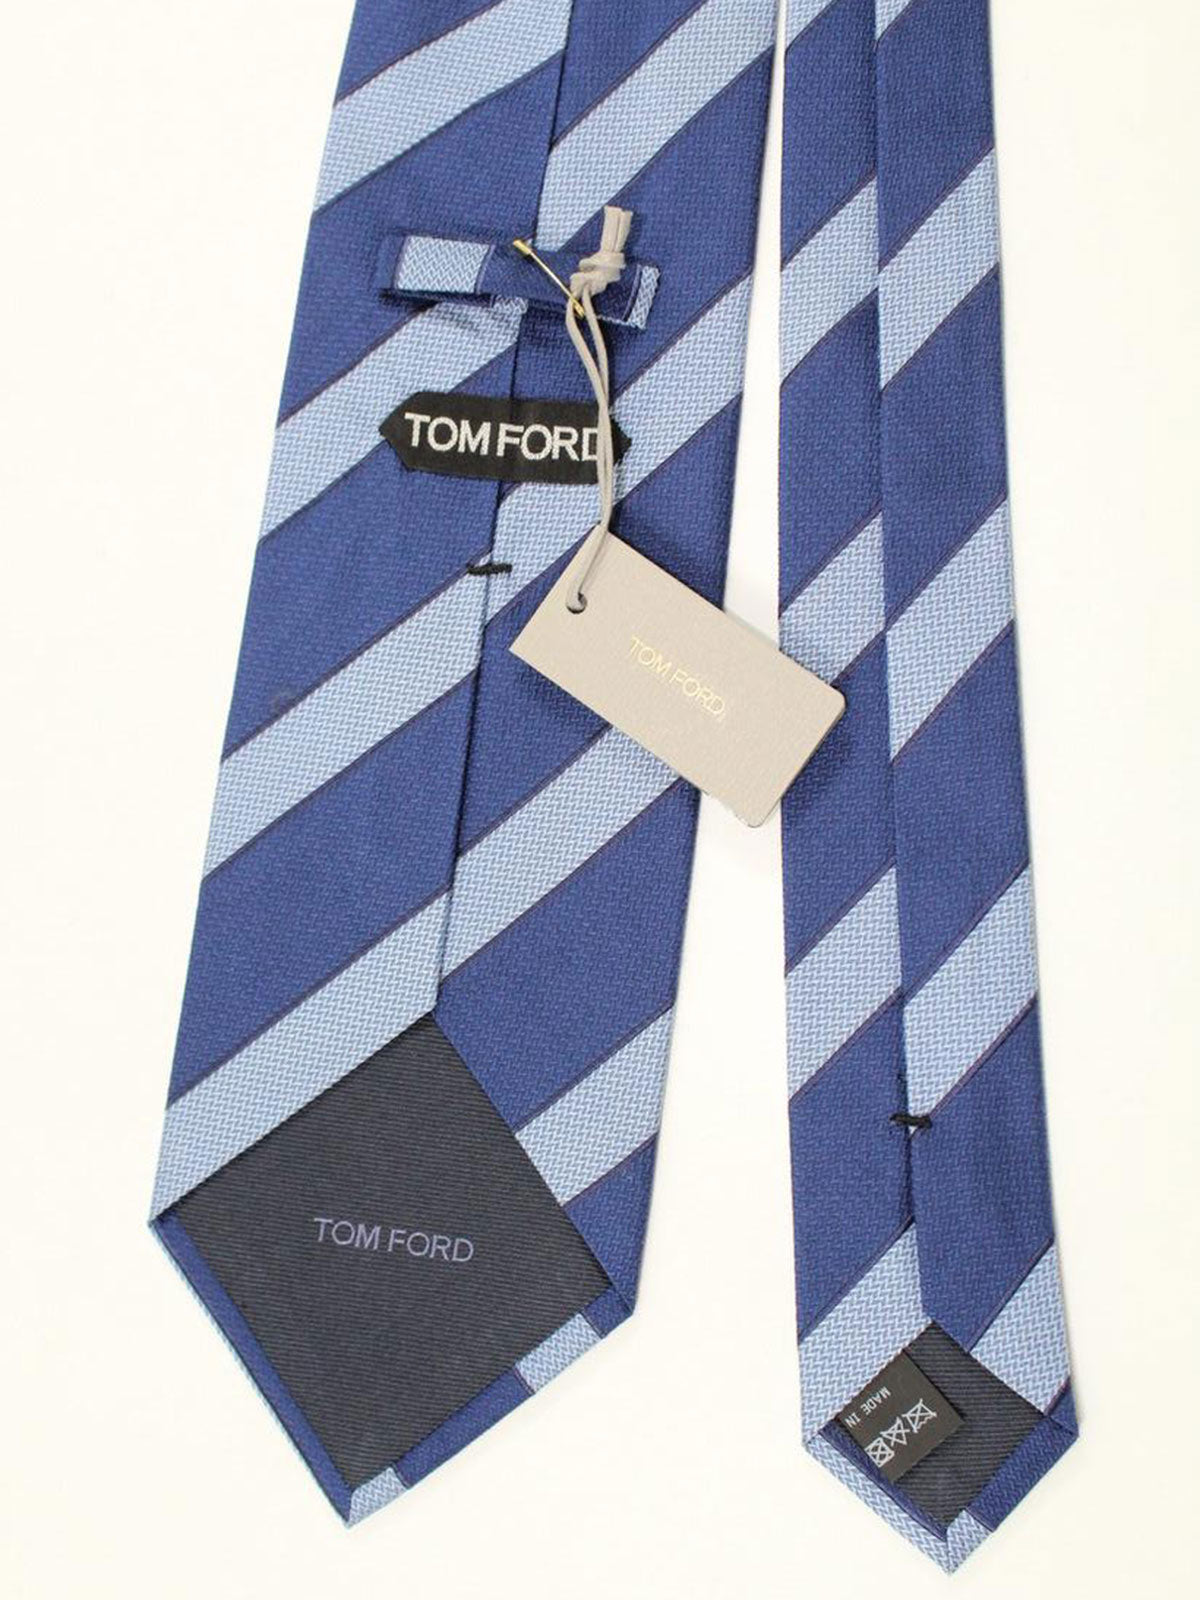 Tom Ford Ties Sale | Bow Ties | Dress Shirts SALE Page 13 - Tie Deals